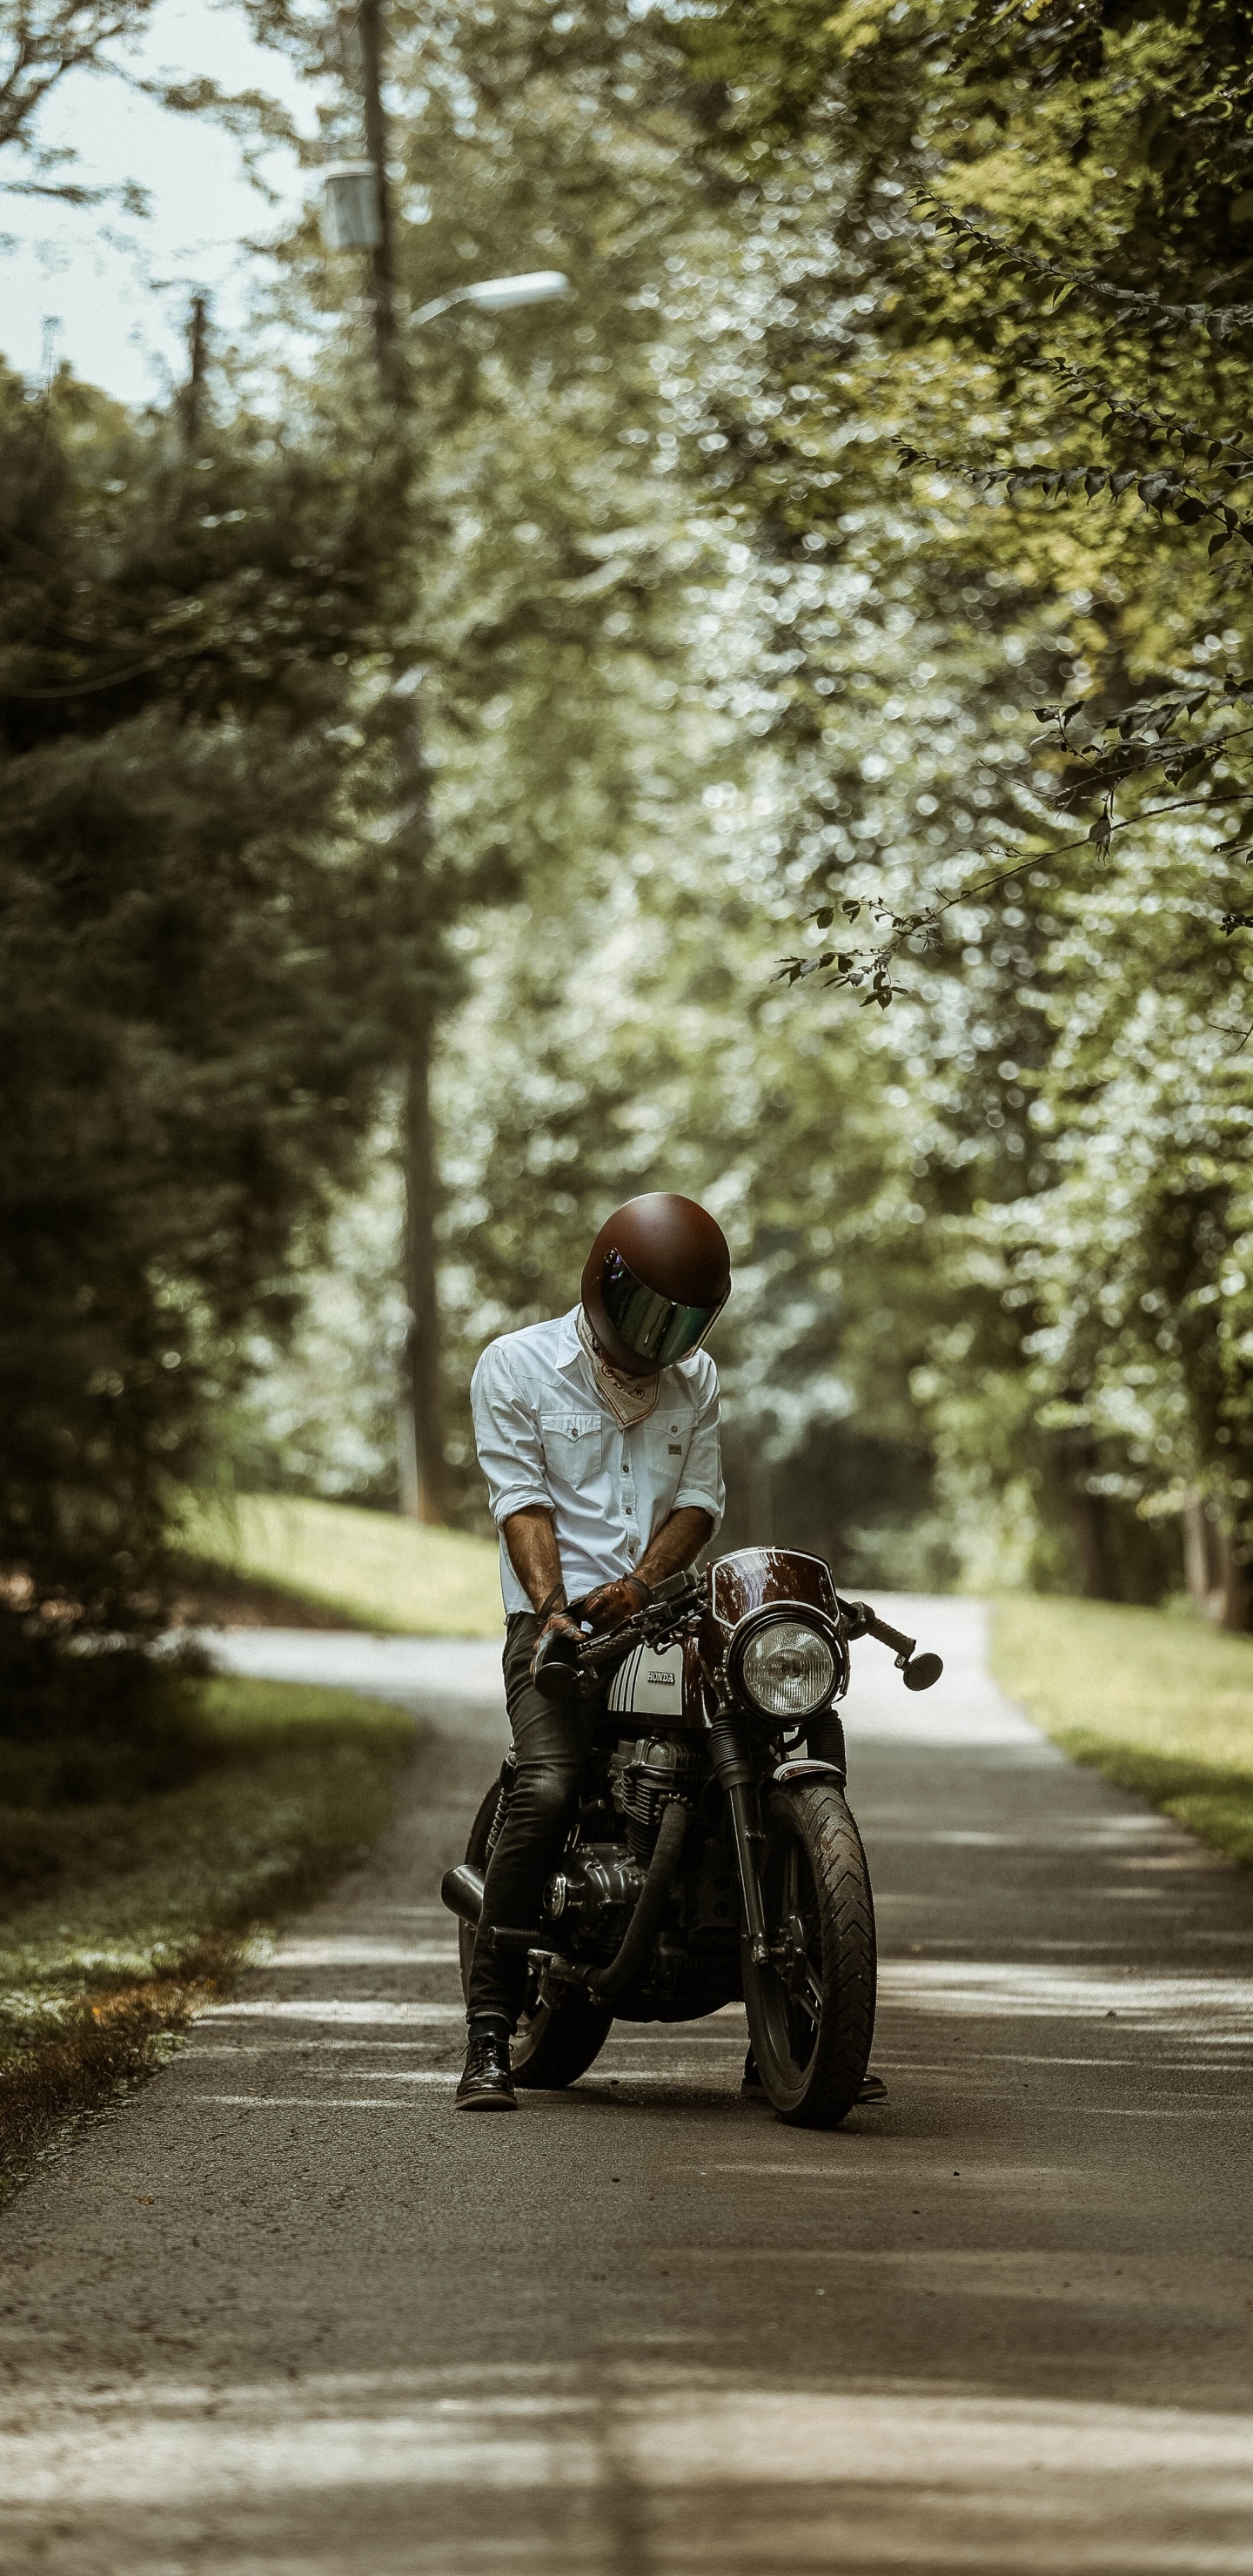 Man in White Shirt Riding Motorcycle on Road During Daytime. Wallpaper in 1440x2960 Resolution